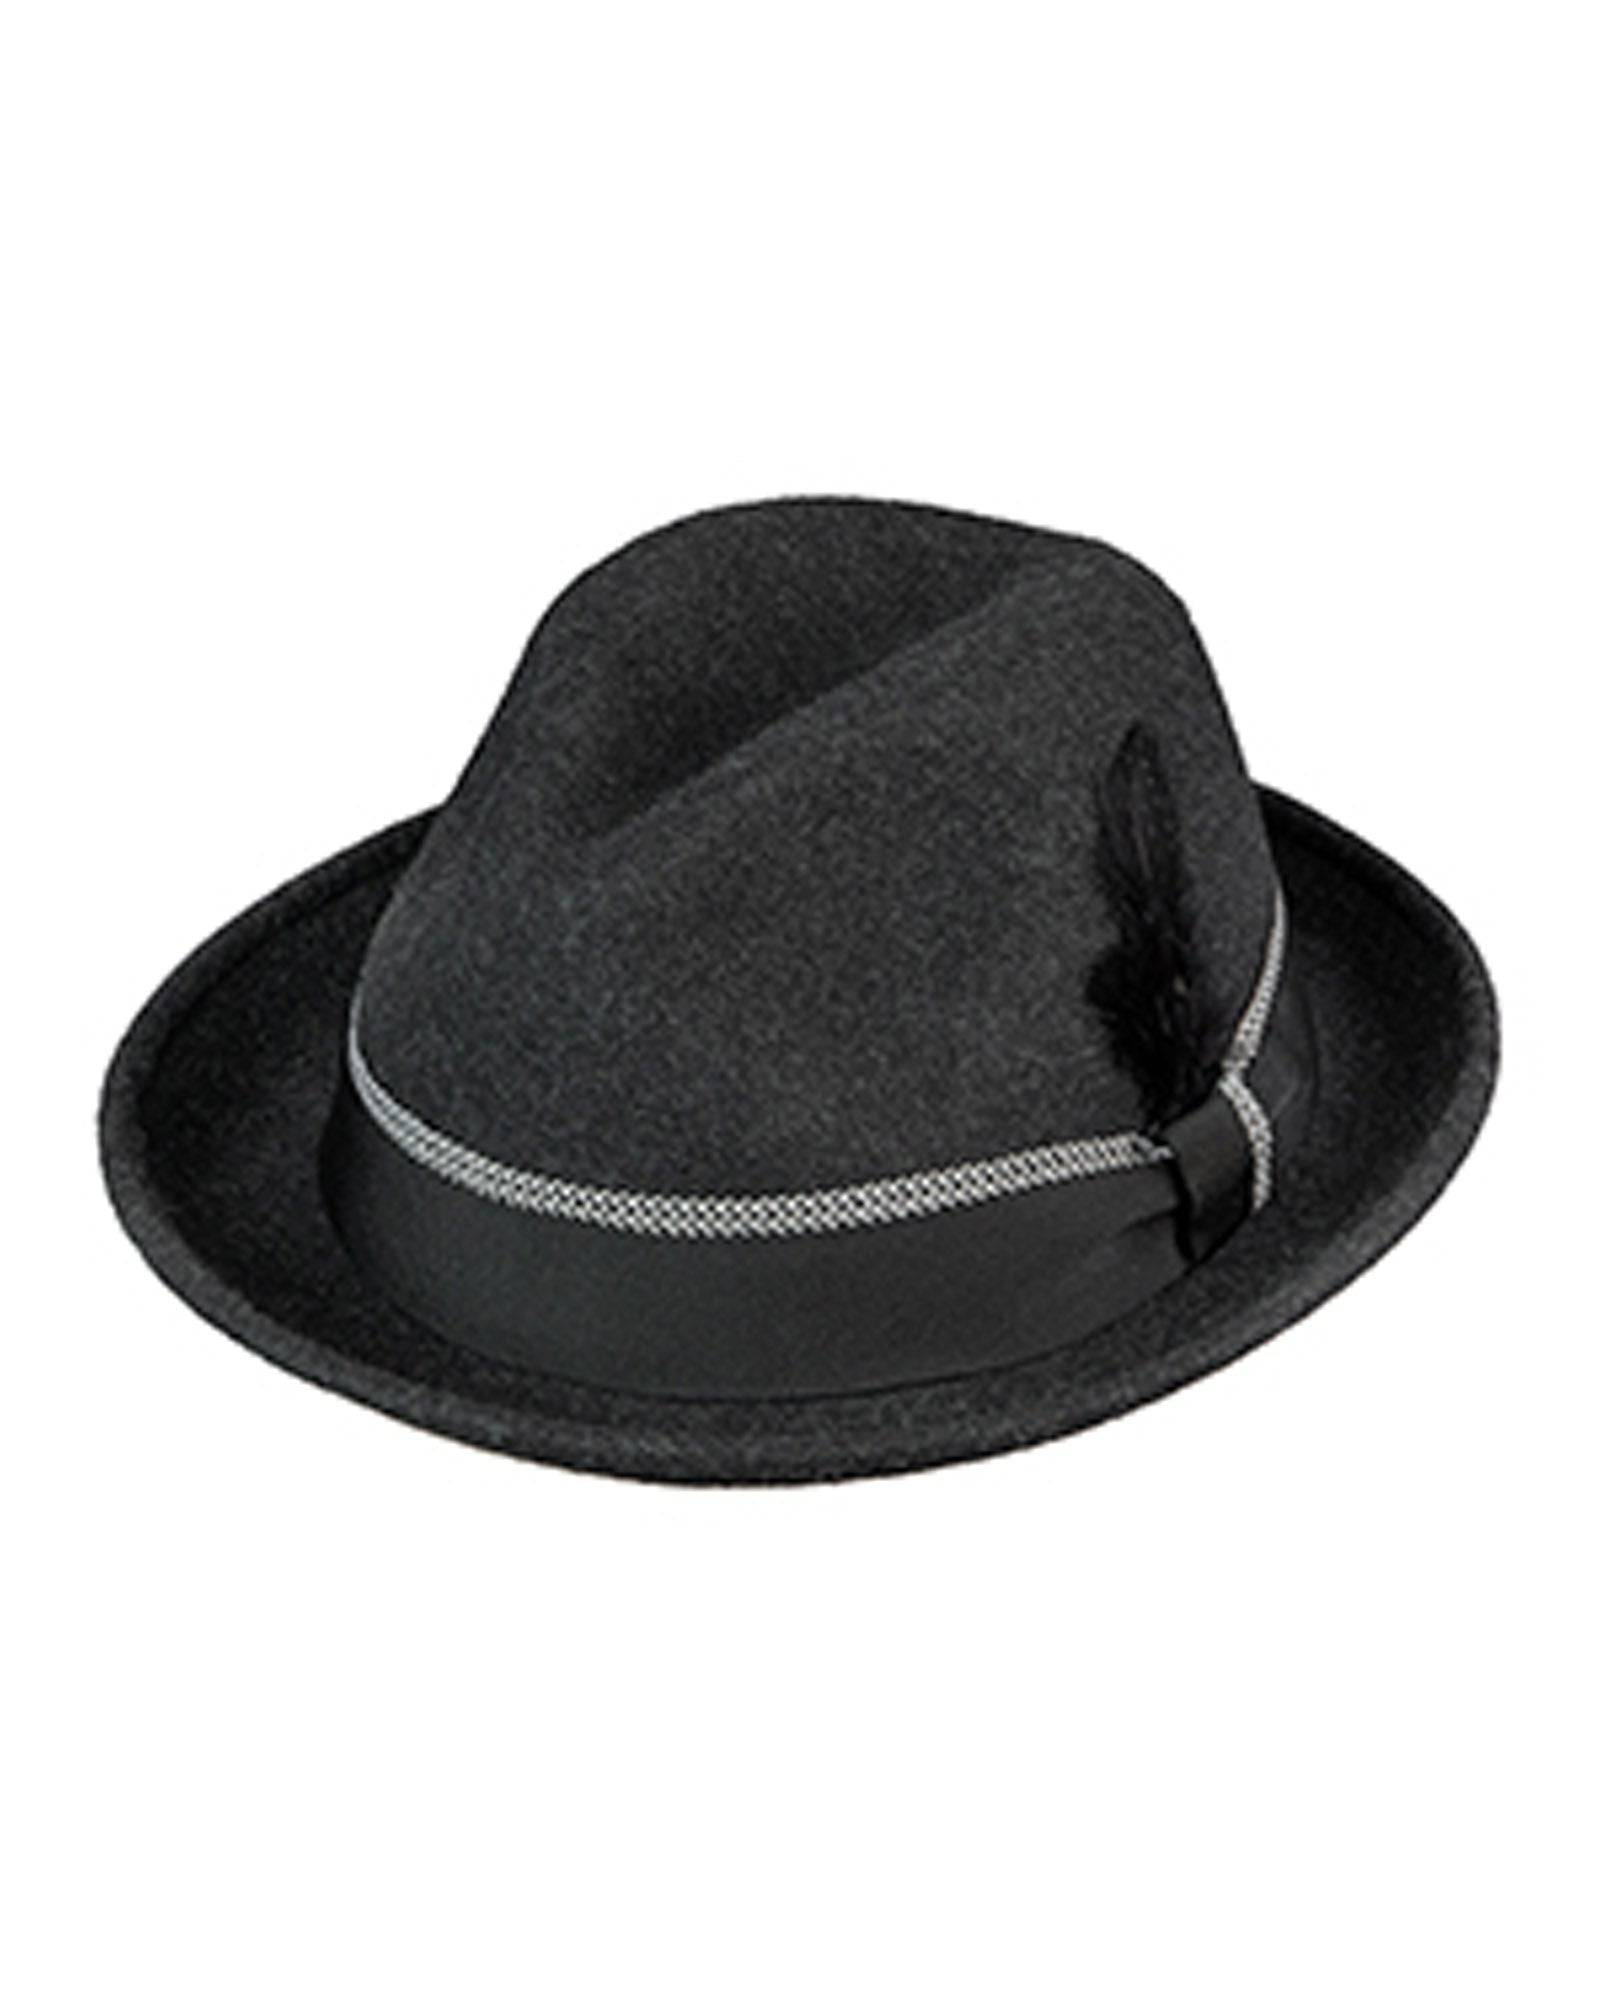 Broner Stallone Wool Felt Fedora with 2 inch Brim in Charcoal Heather - Rainwater's Men's Clothing and Tuxedo Rental